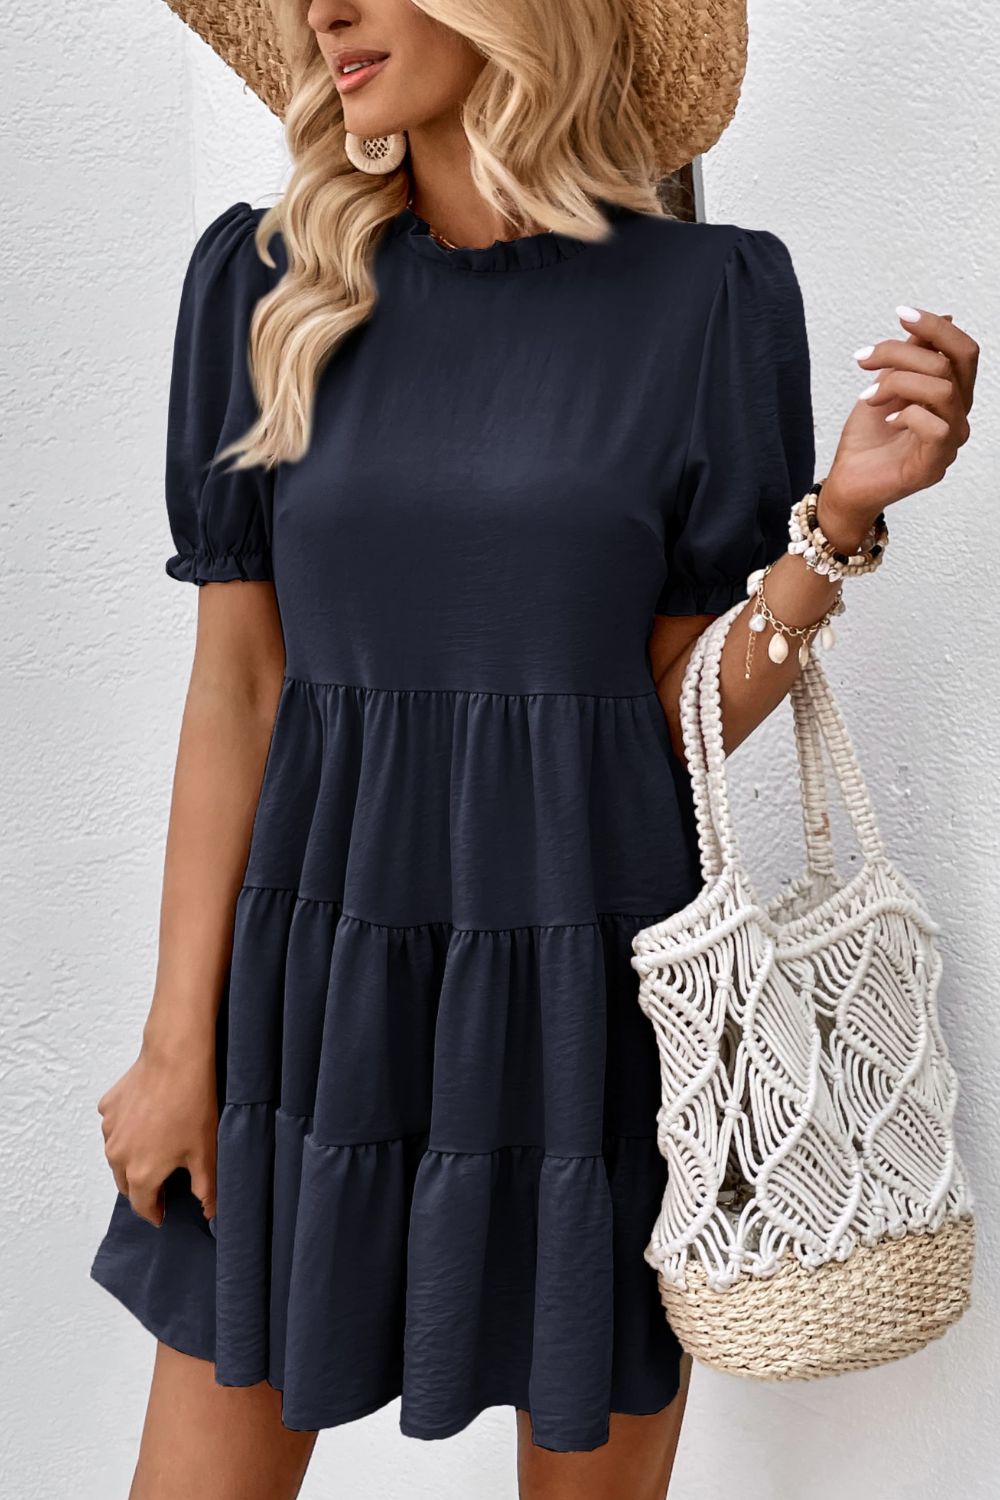 Black Puff Sleeve Tie Back Tiered Dress Clothing